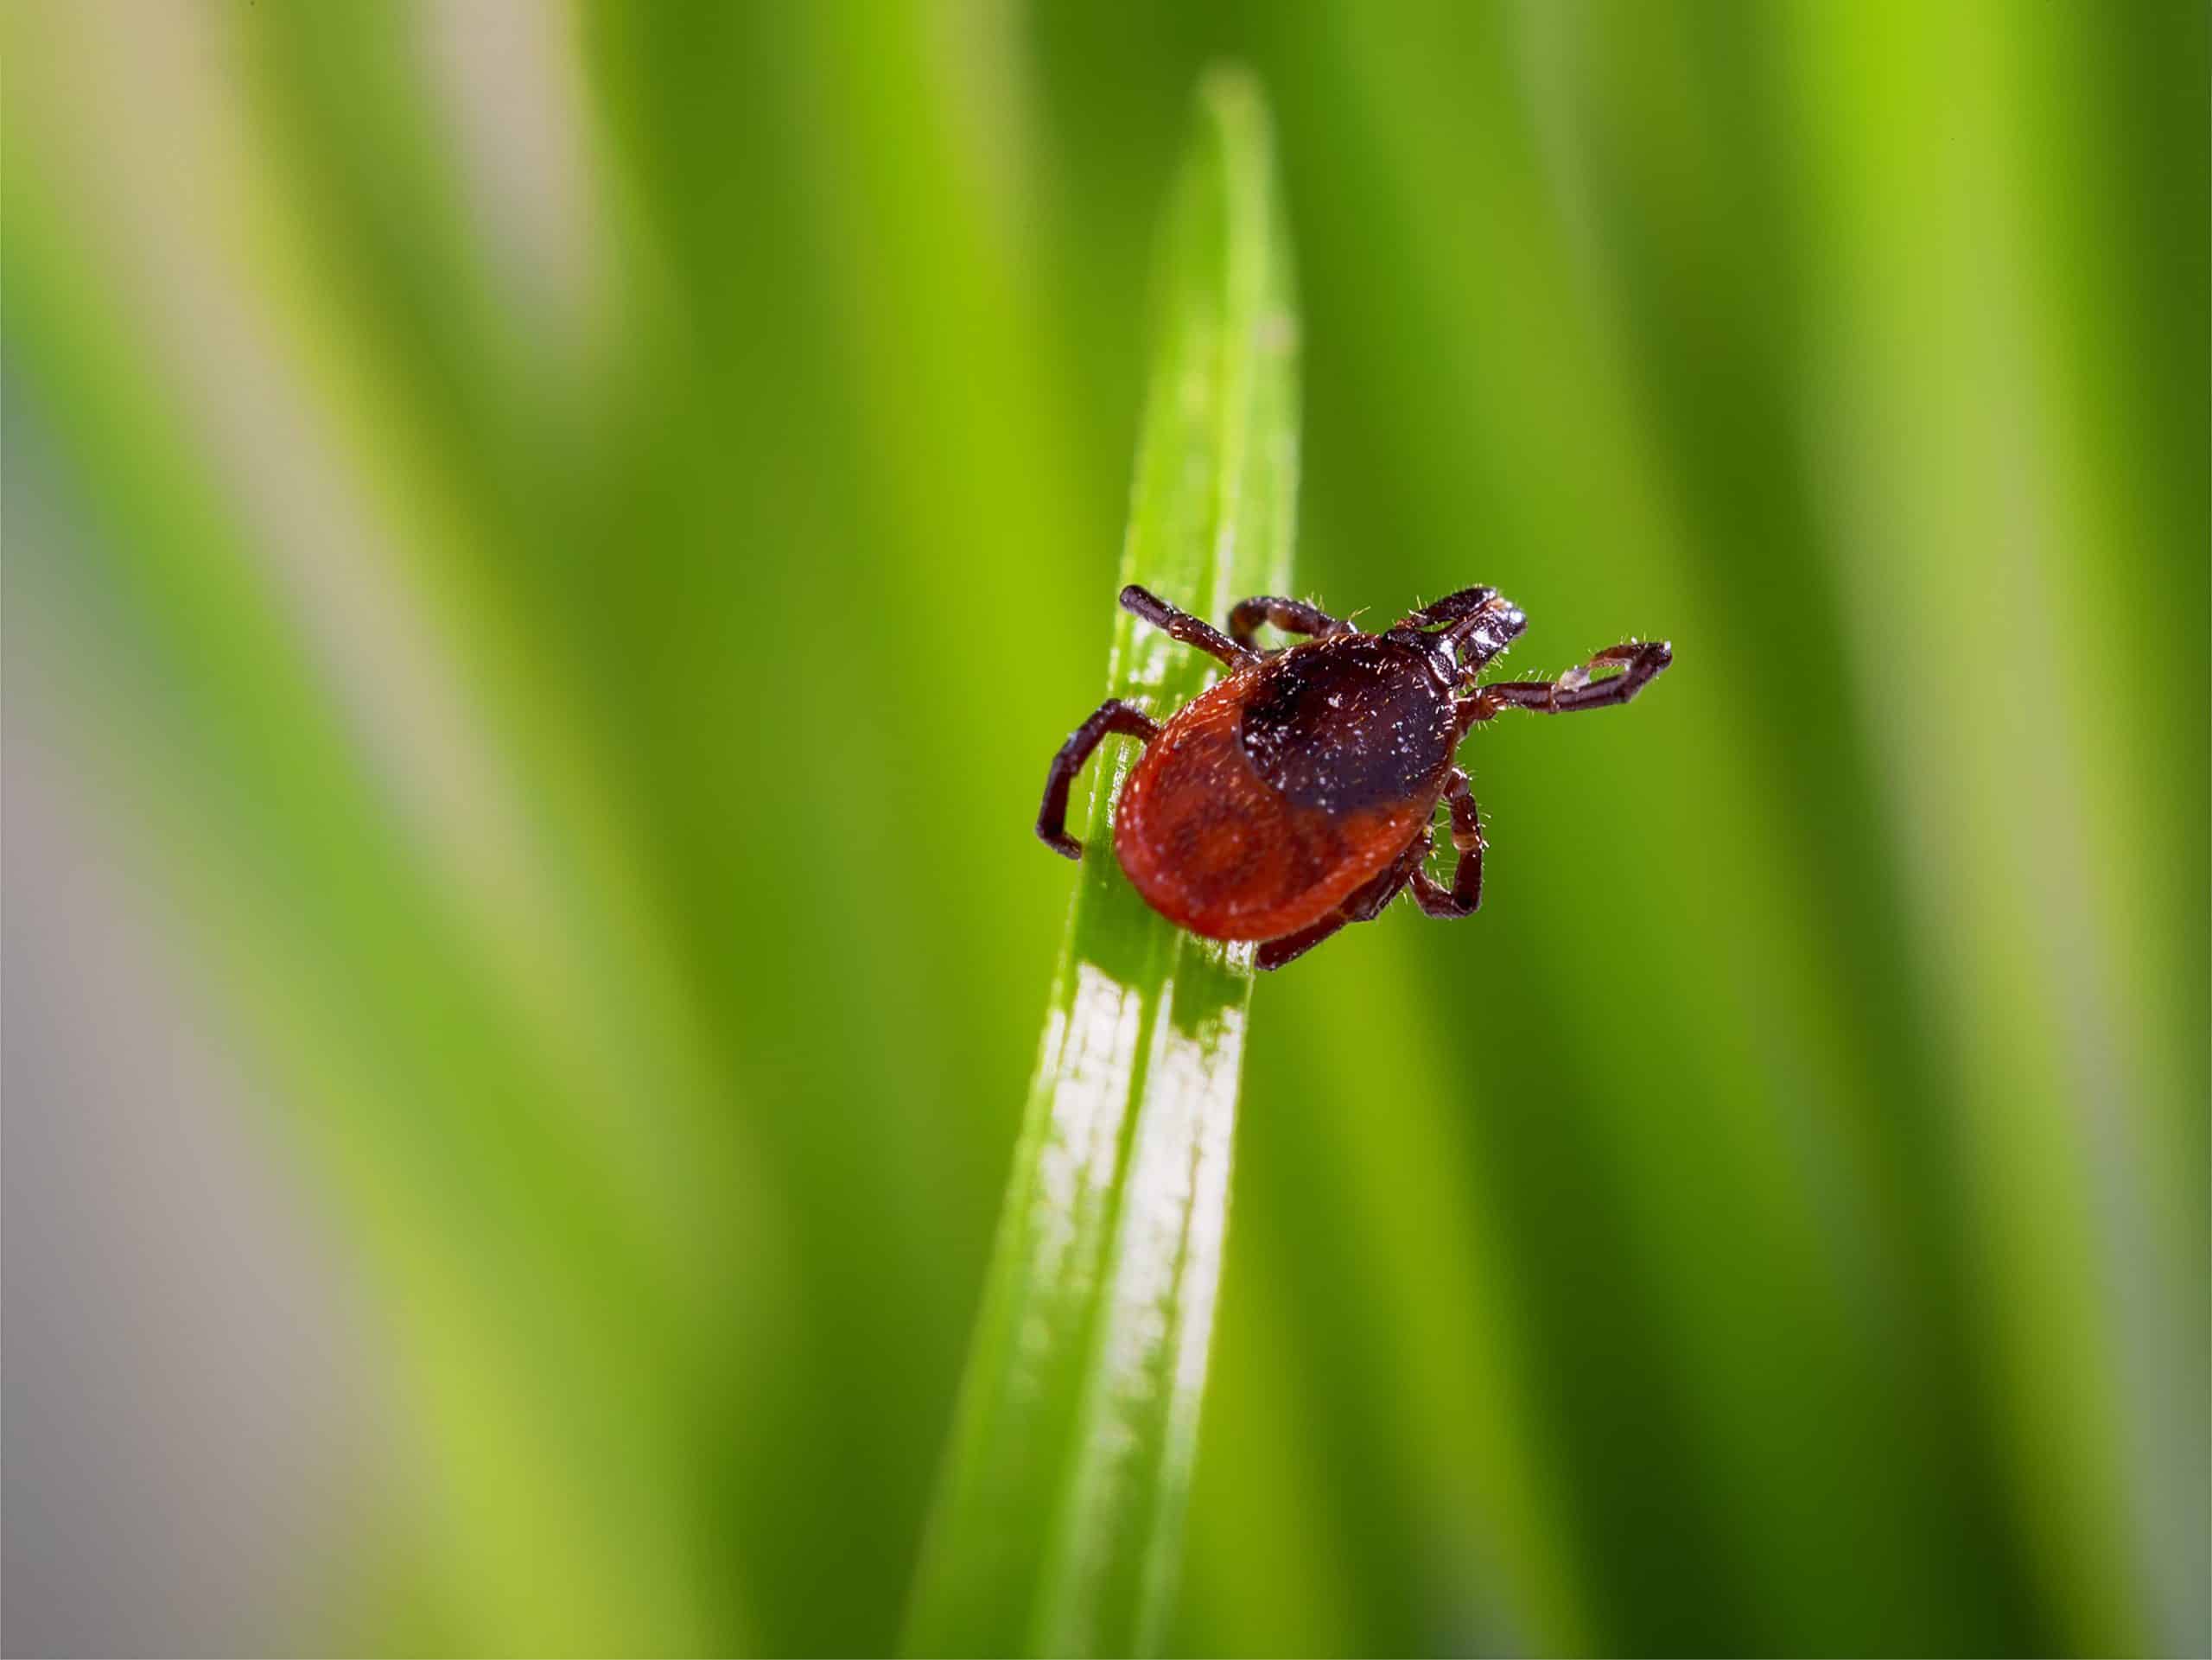 red and black tick hanging on blade of grass